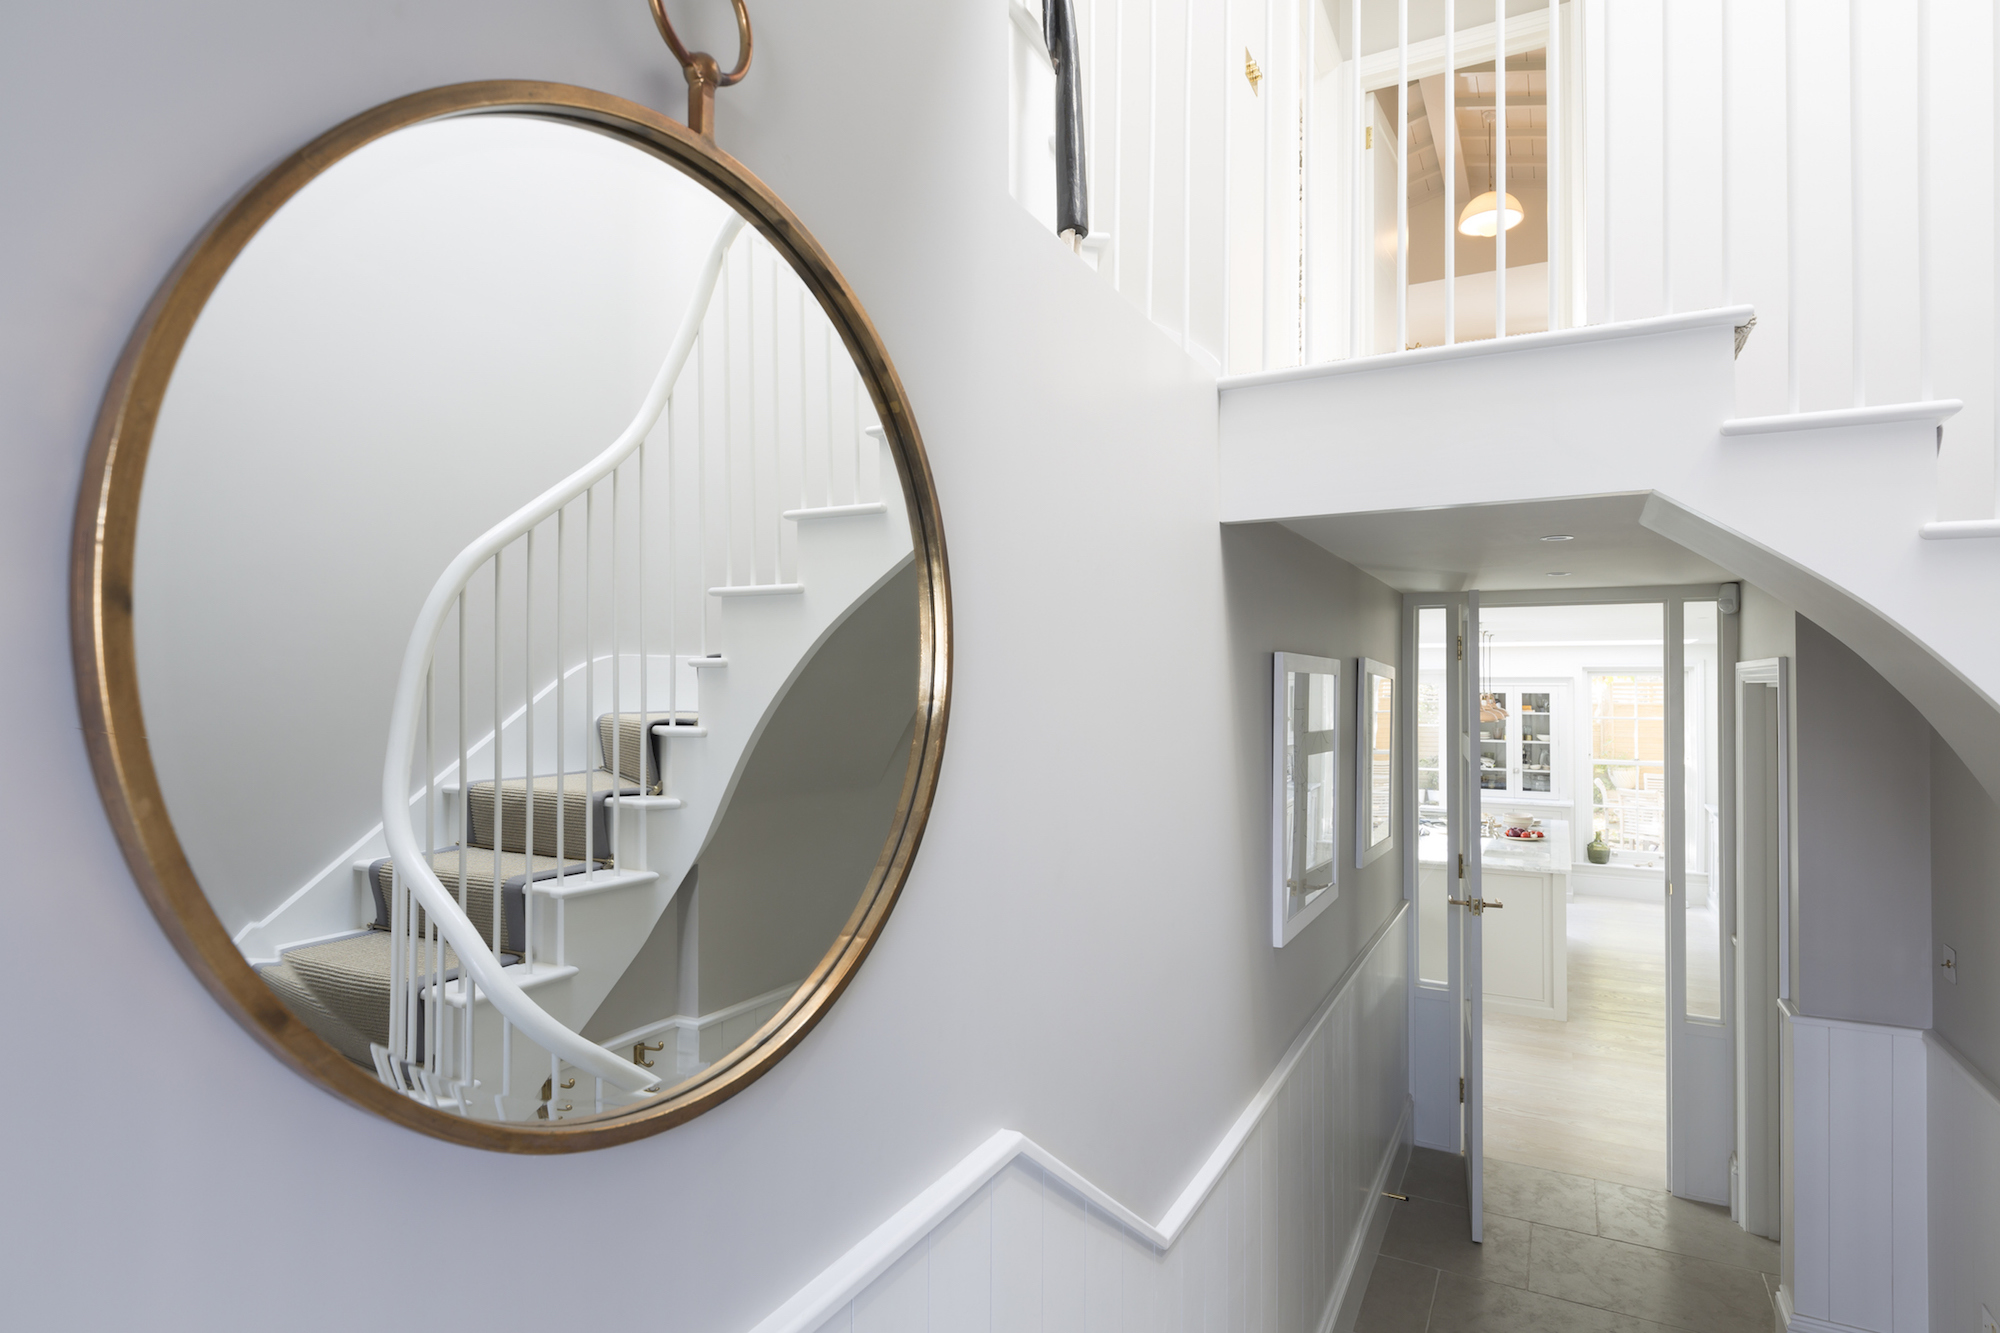 Large round mirror in the hallway of a home